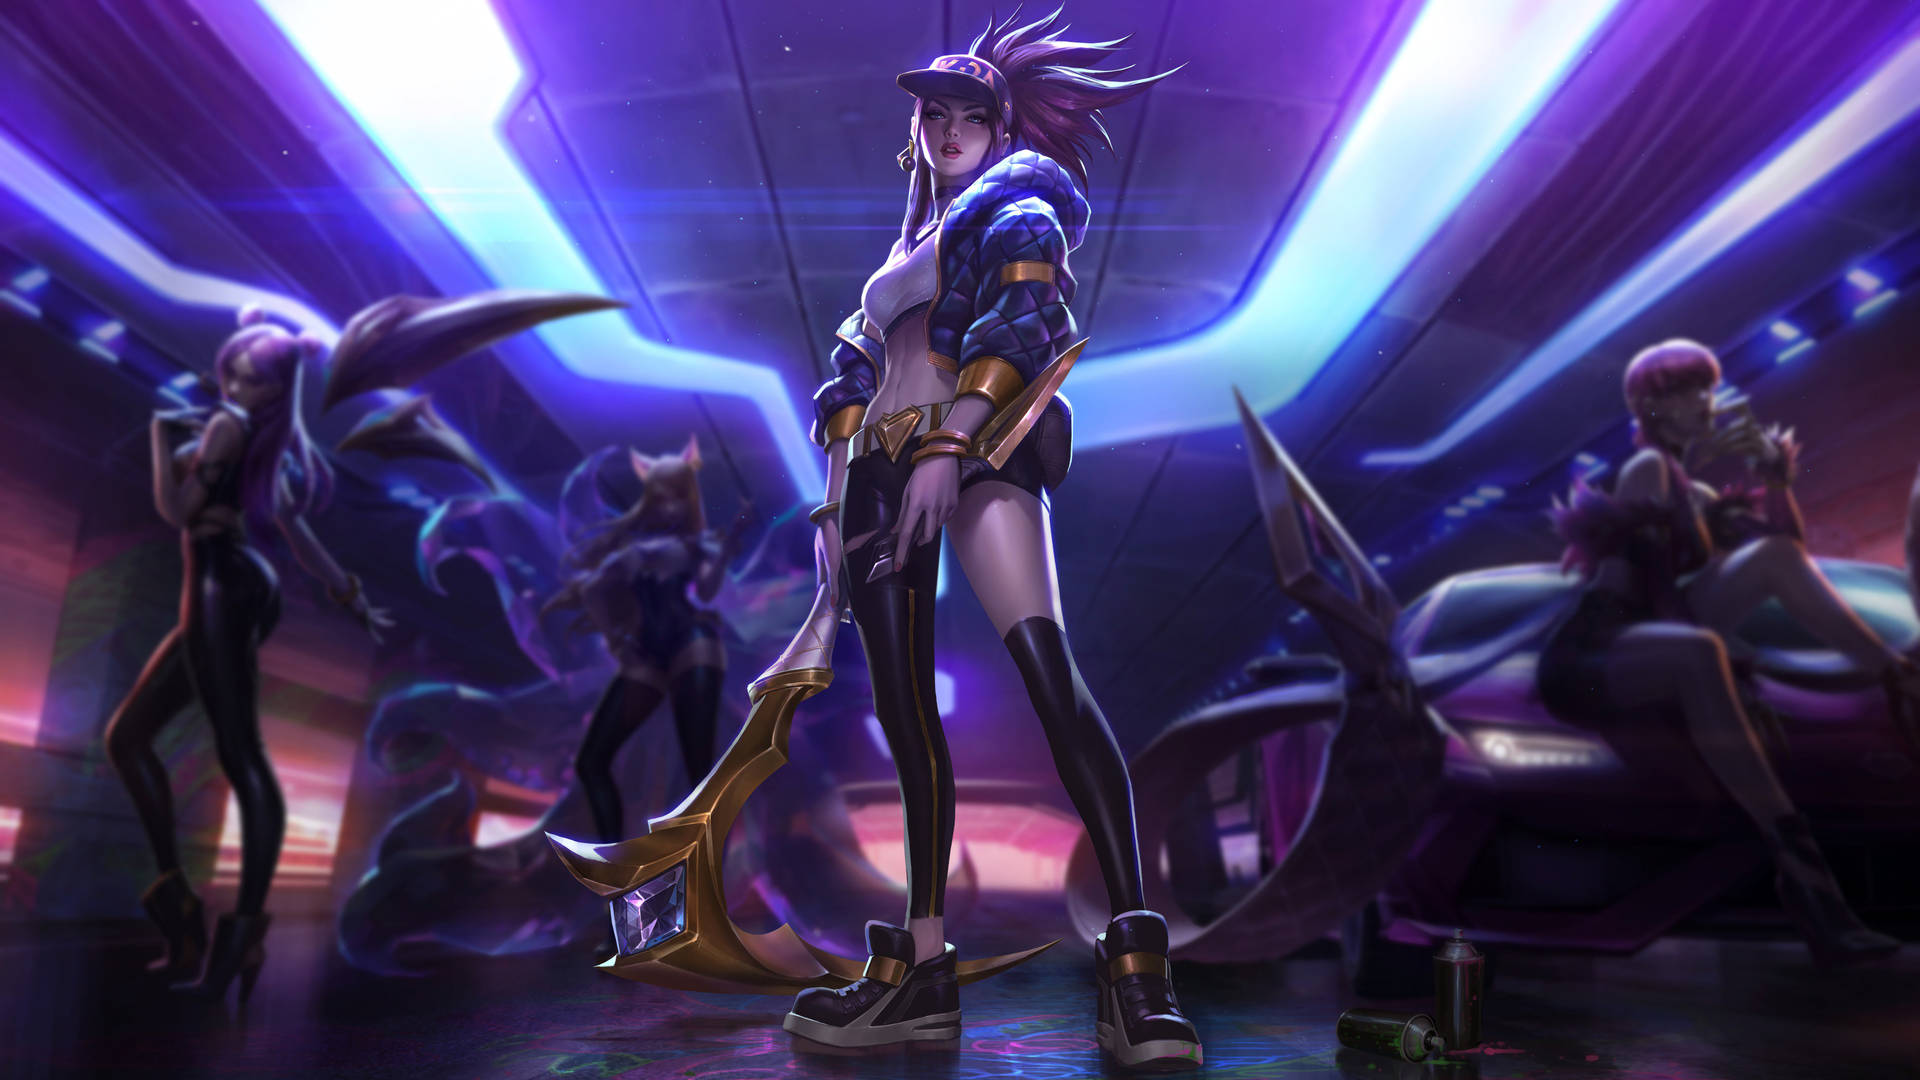 League Of Legends Hero Akali Displayed On A 4k Gaming Smartphone Screen Background